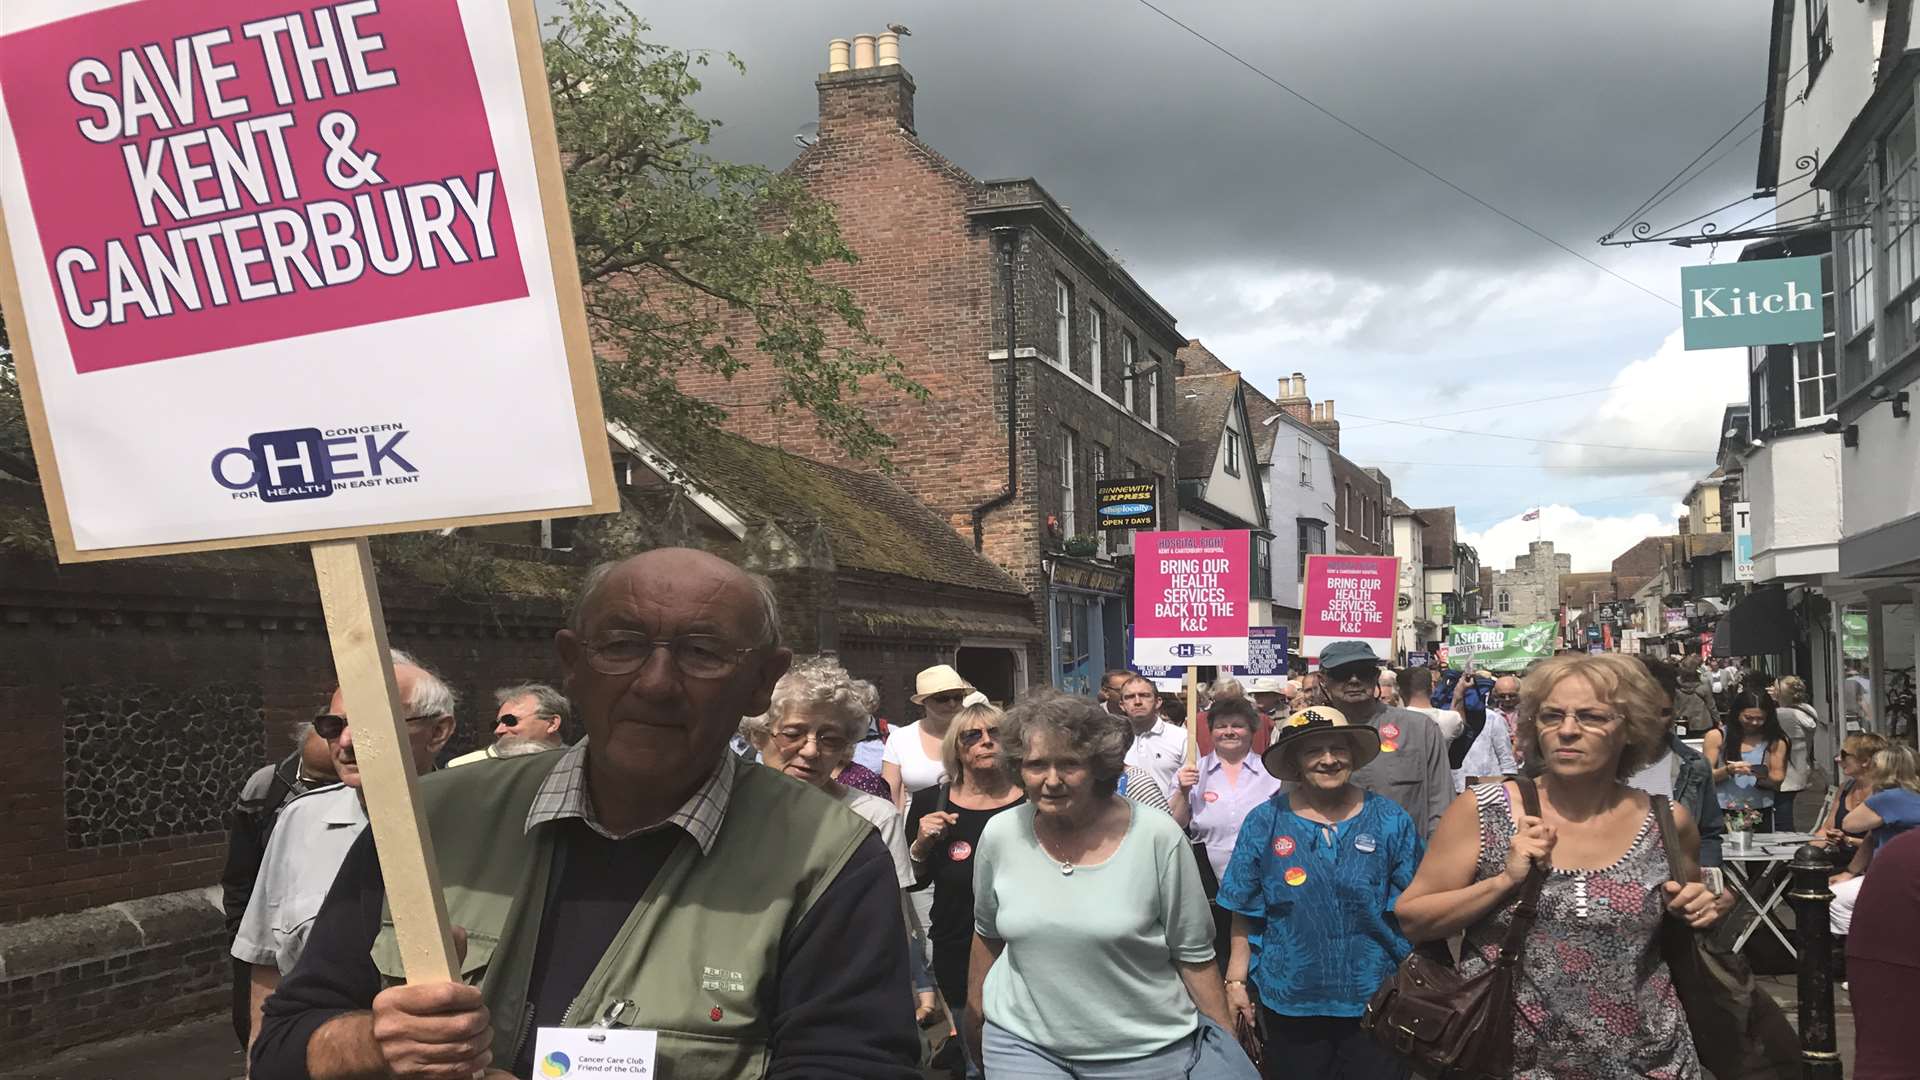 The march gets underway in Canterbury